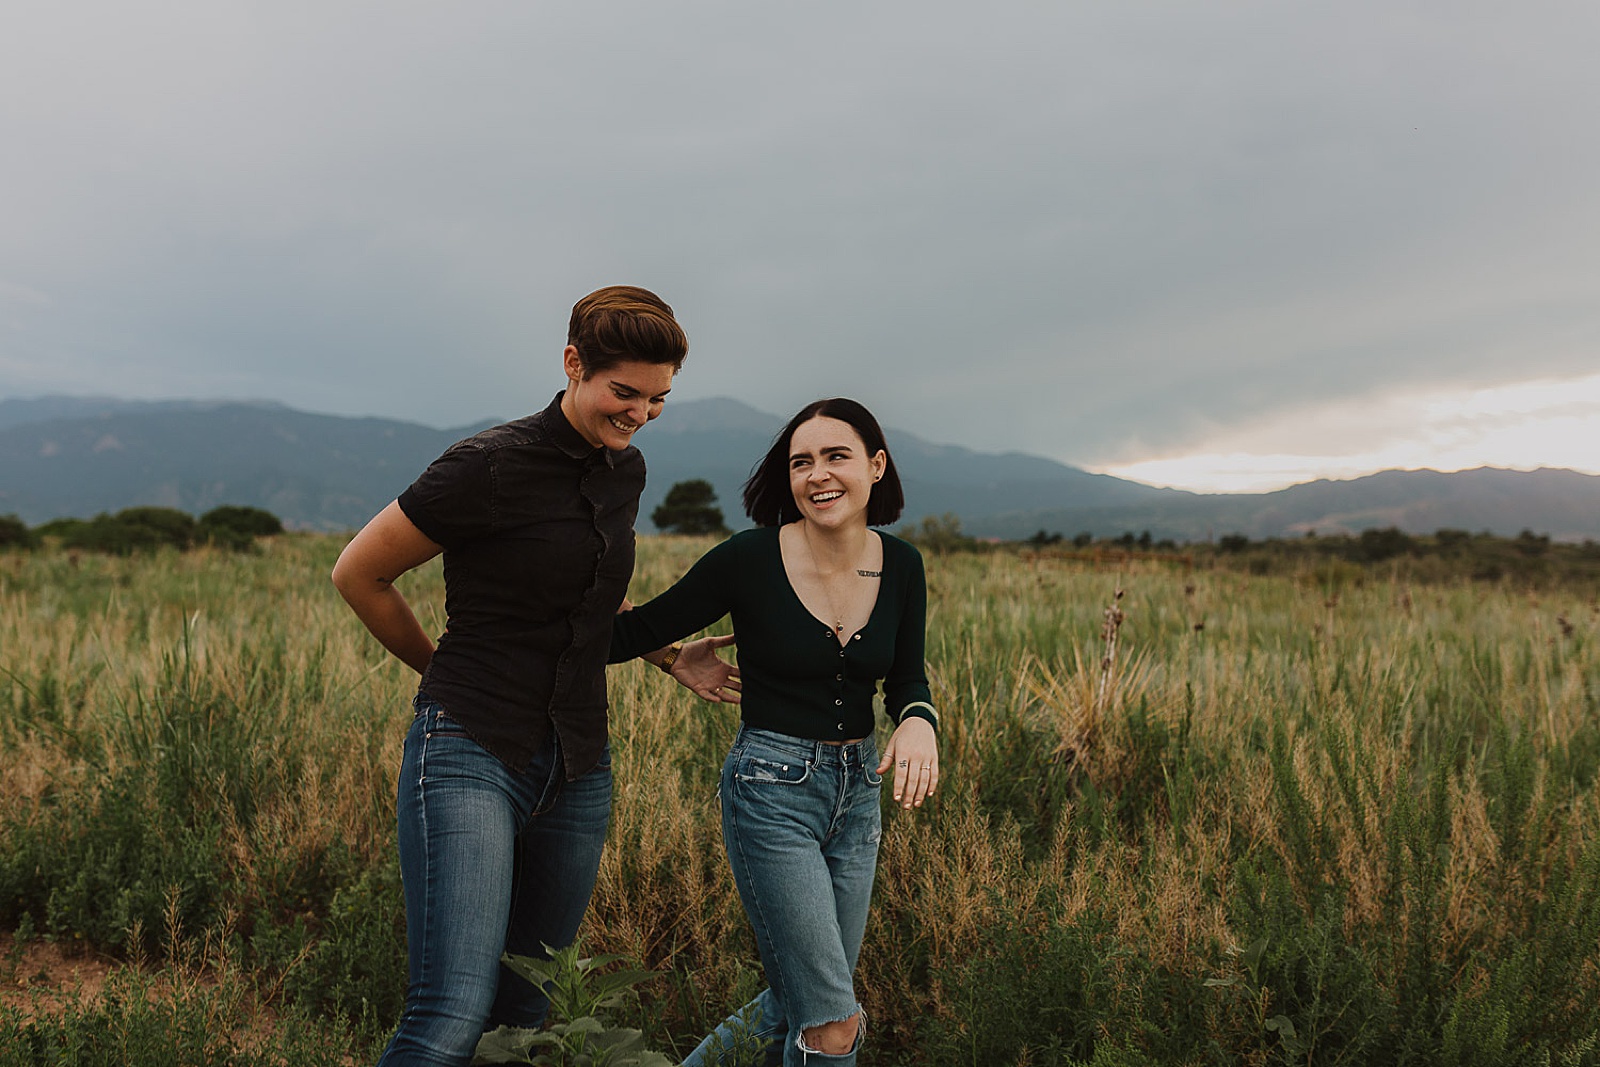 Casual Colorado Springs engagement photos in Palmer Park by Caitlyn Cloud Photography